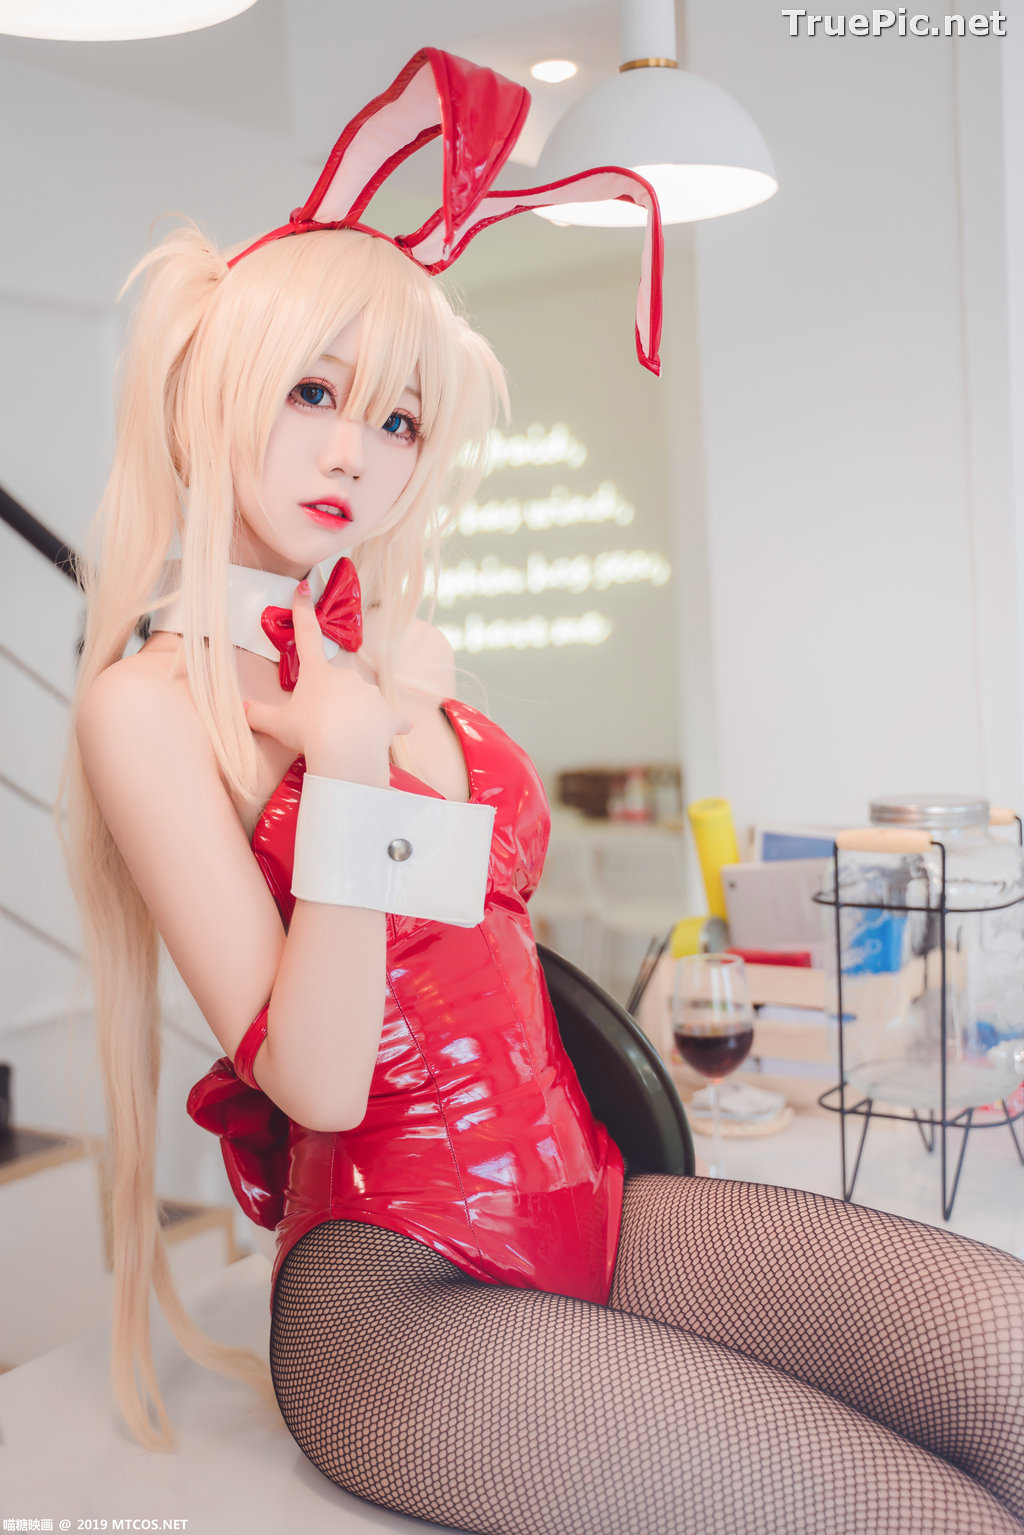 Image [MTCos] 喵糖映画 Vol.021 – Chinese Cute Model – Red Bunny Girl Cosplay - TruePic.net - Picture-13